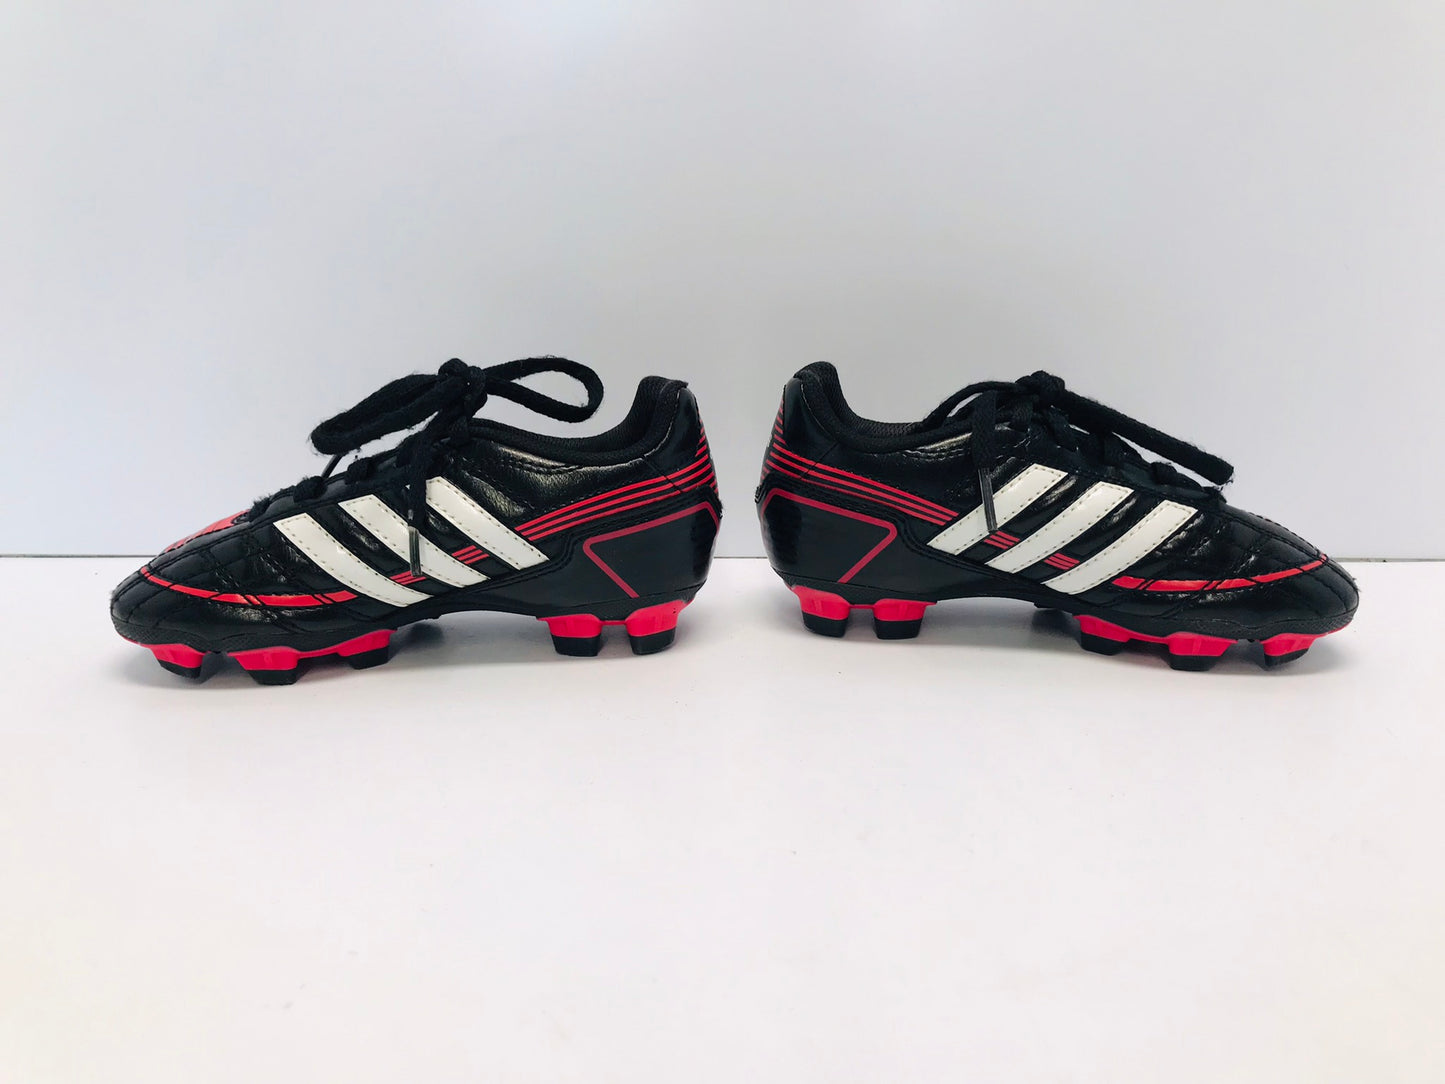 Soccer Shoes Cleats Child Size 11 Adidas Black Pink White Excellent